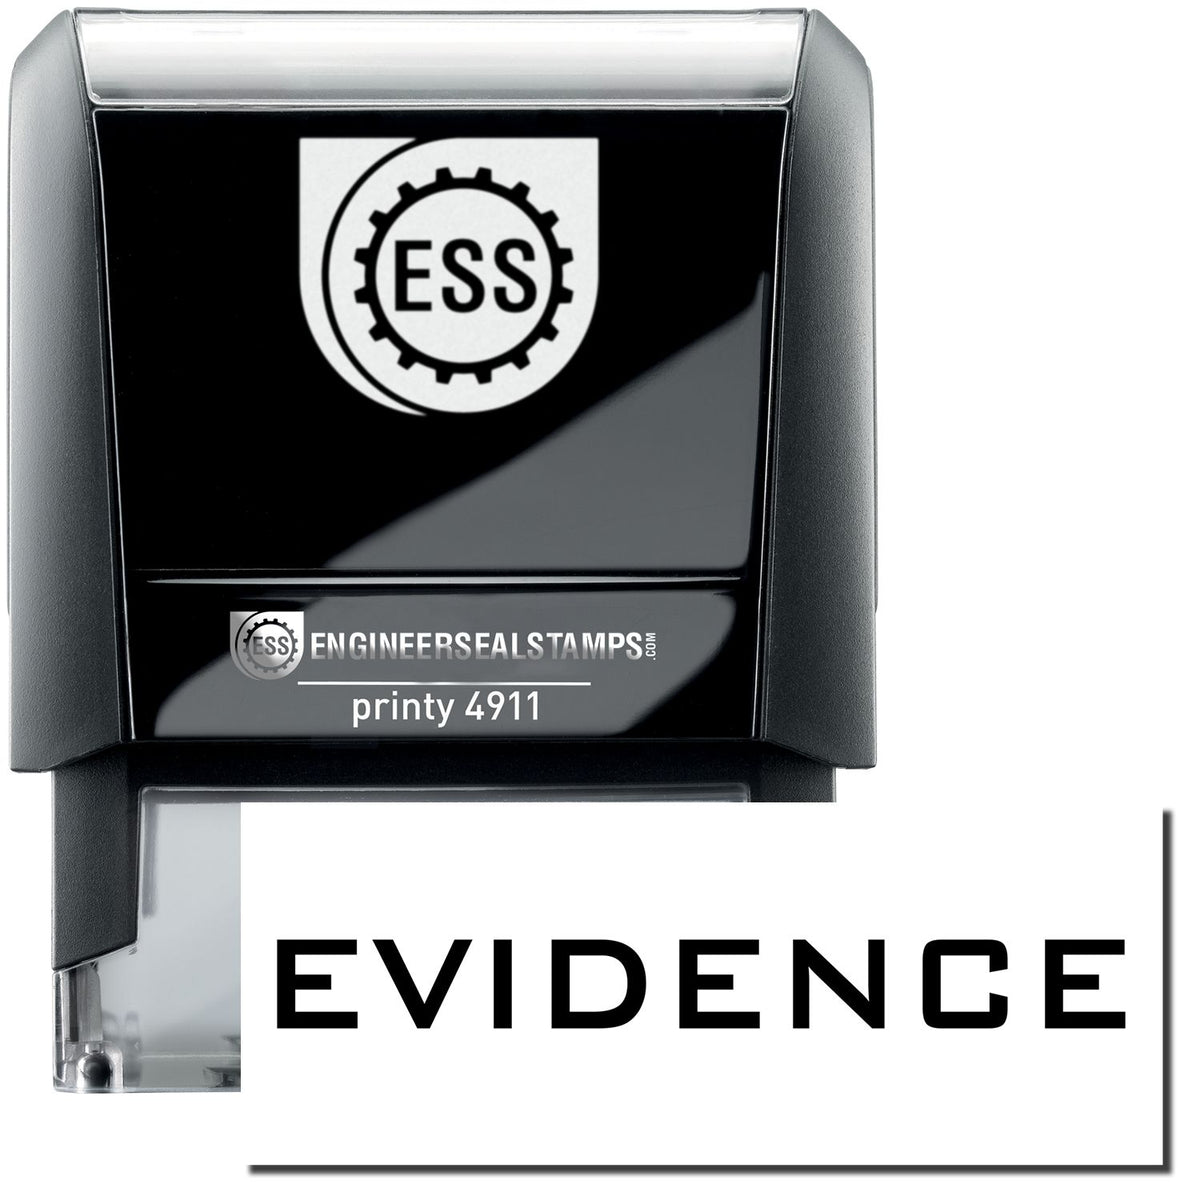 A self-inking stamp with a stamped image showing how the text &quot;EVIDENCE&quot; is displayed after stamping.